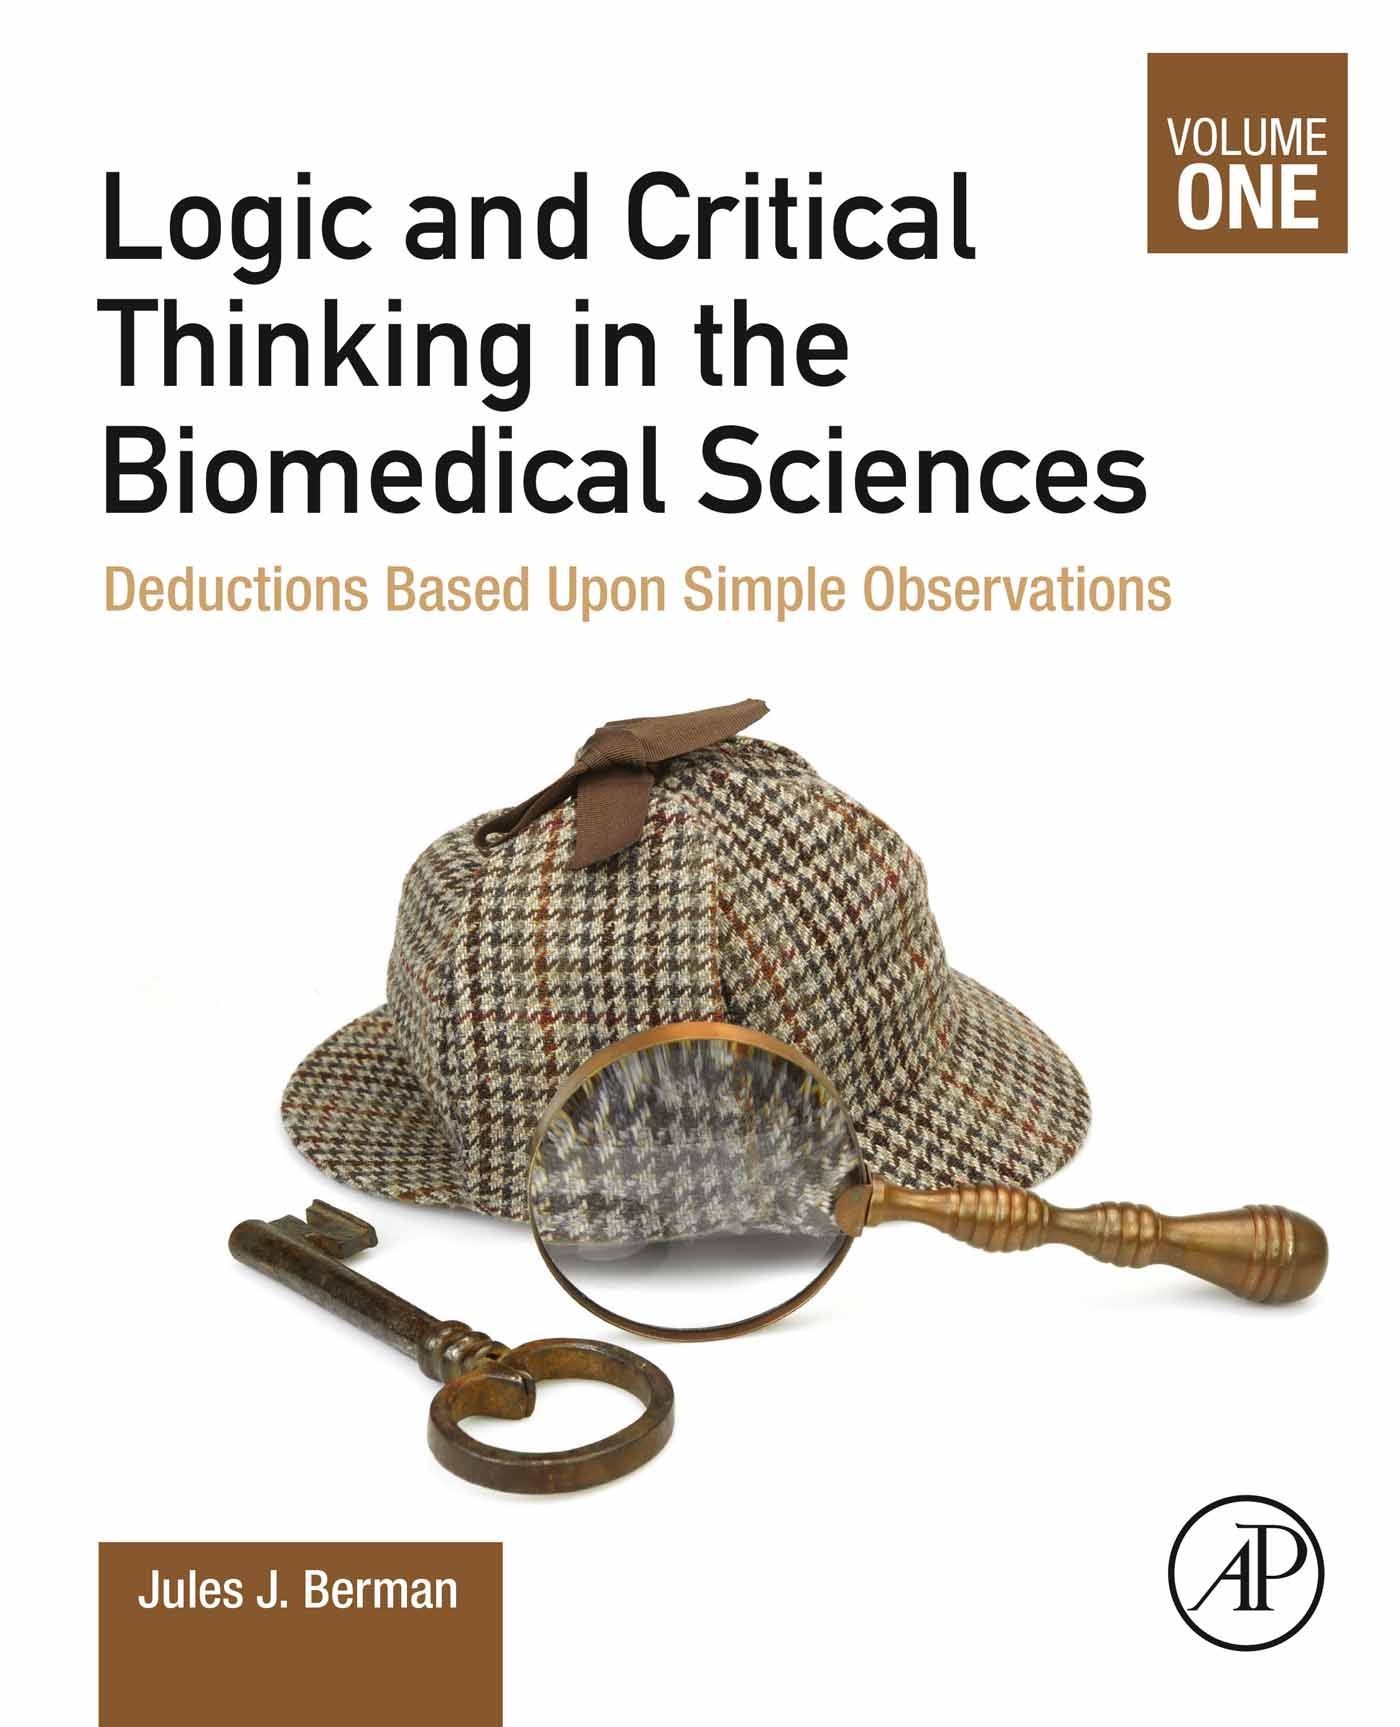 logic and critical thinking book pdf download